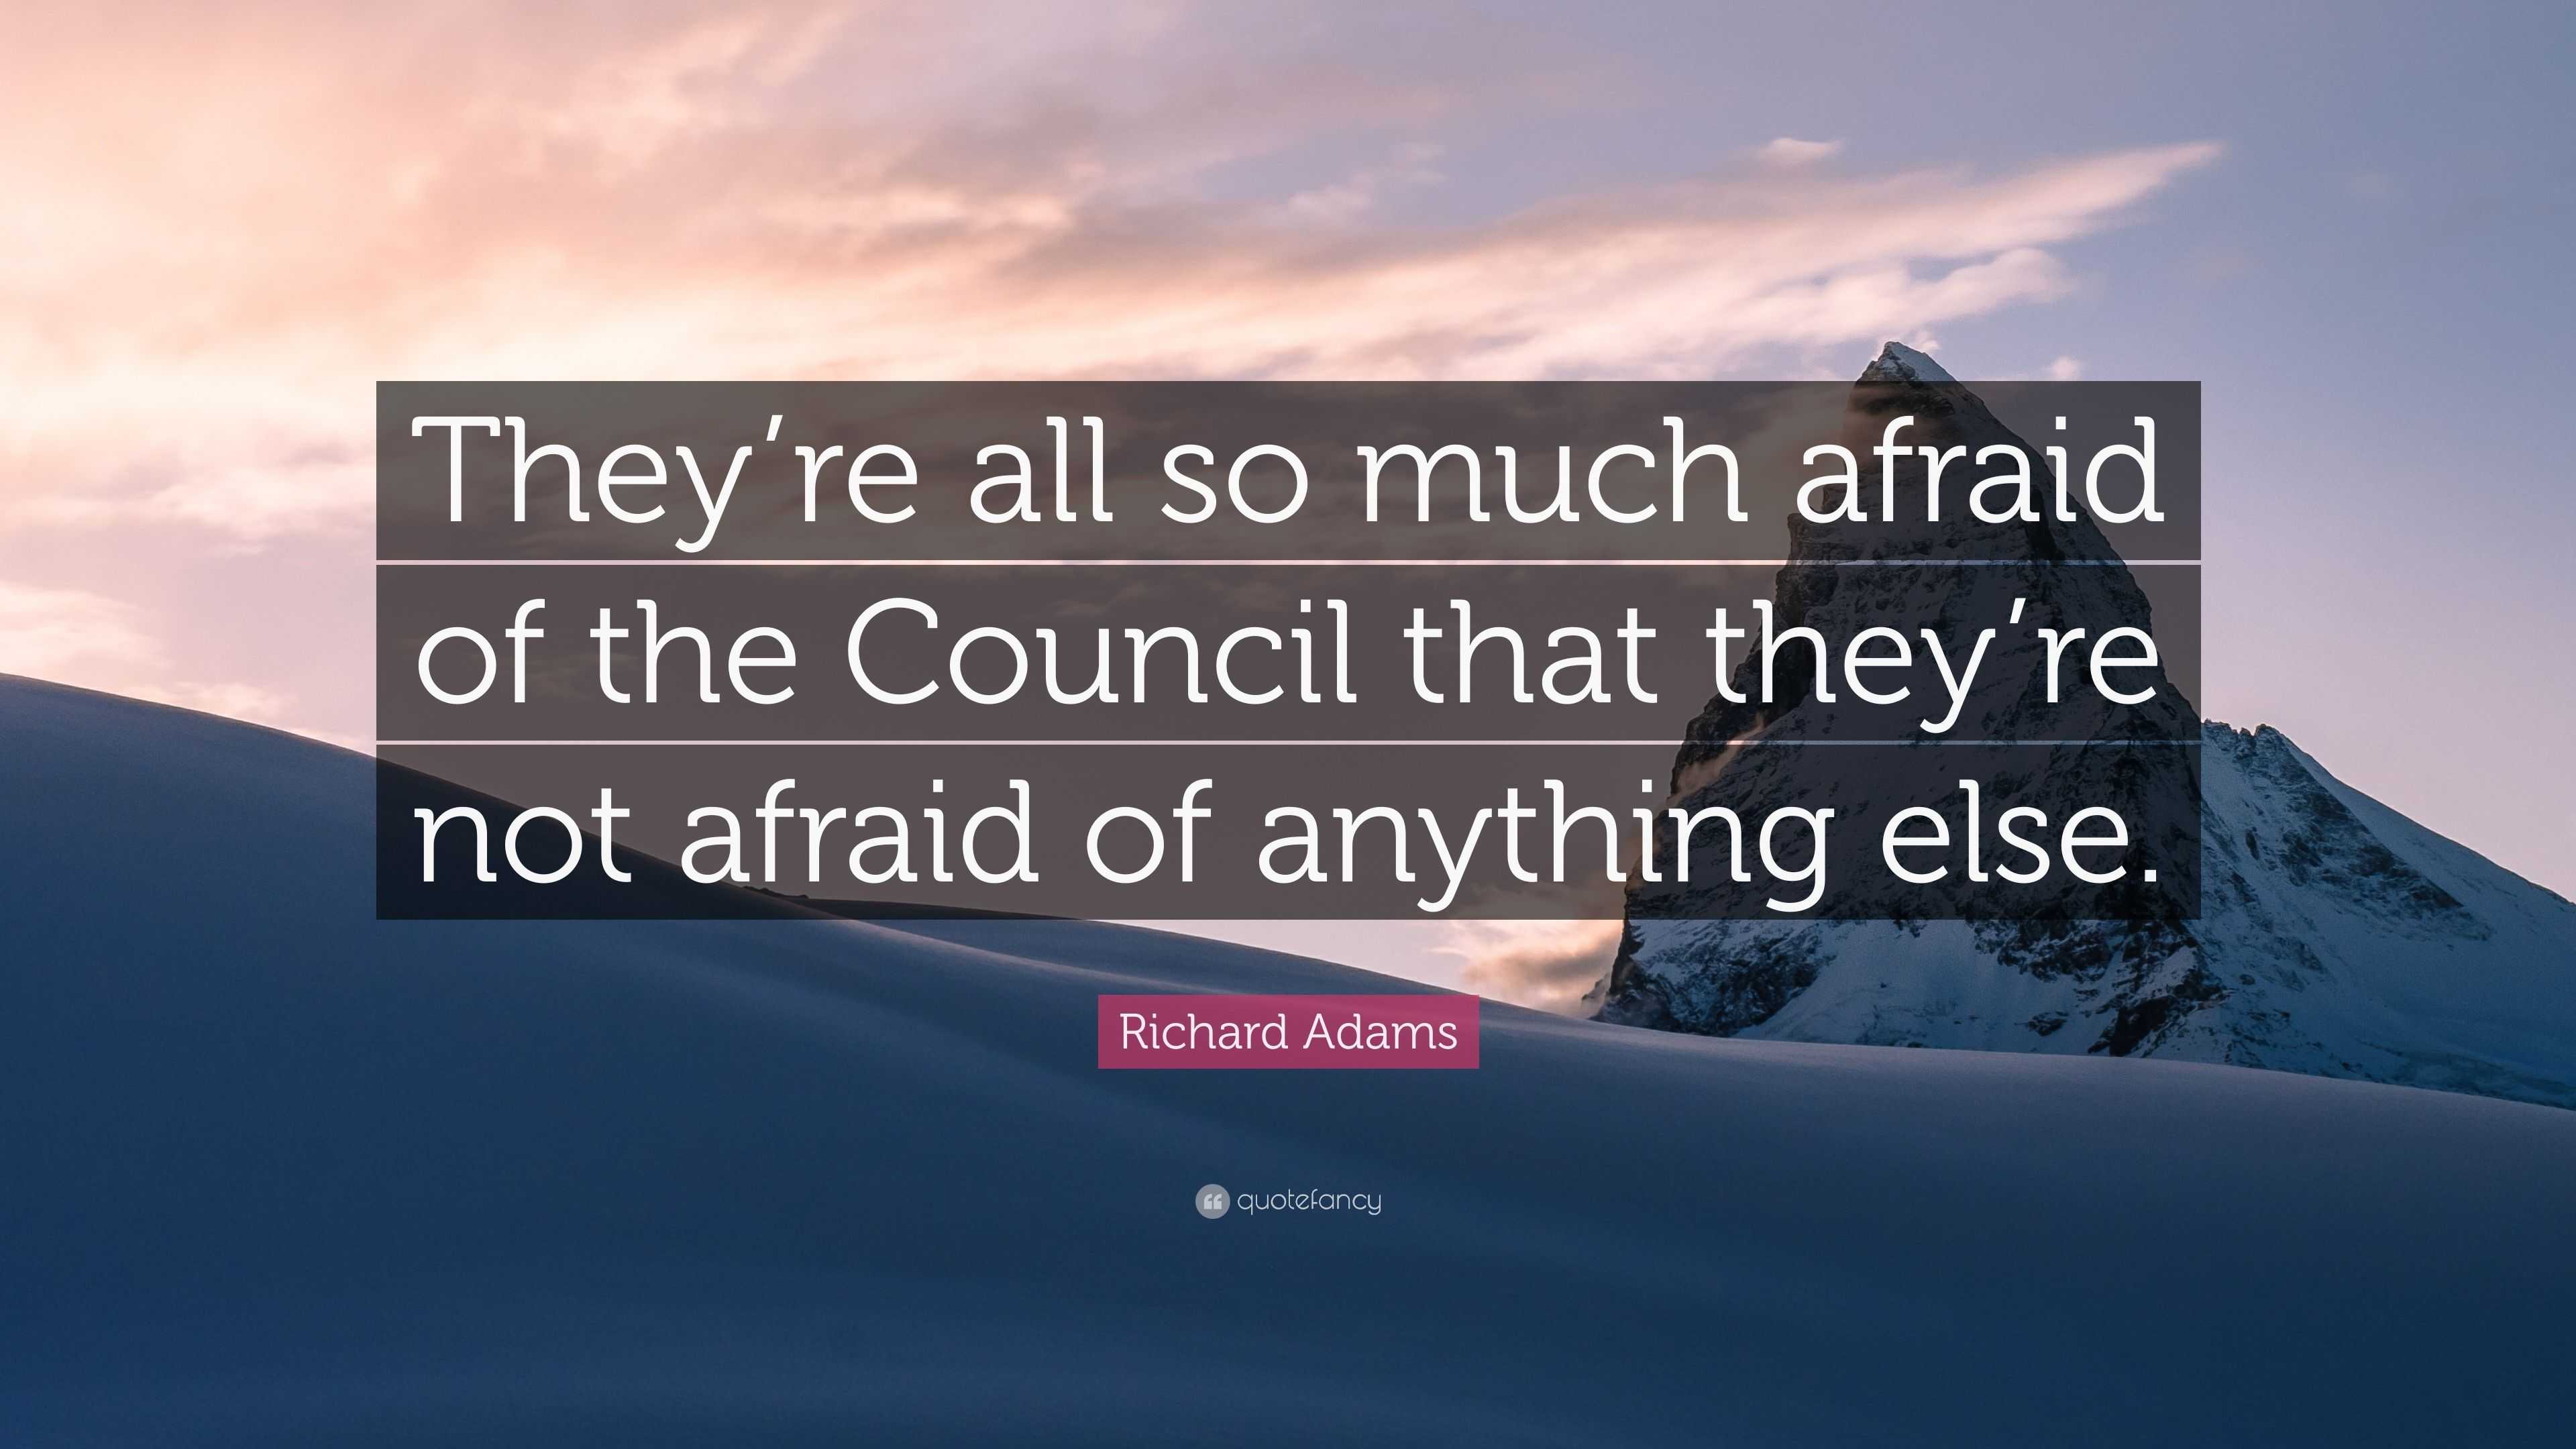 Richard Adams Quote “theyre All So Much Afraid Of The Council That Theyre Not Afraid Of 